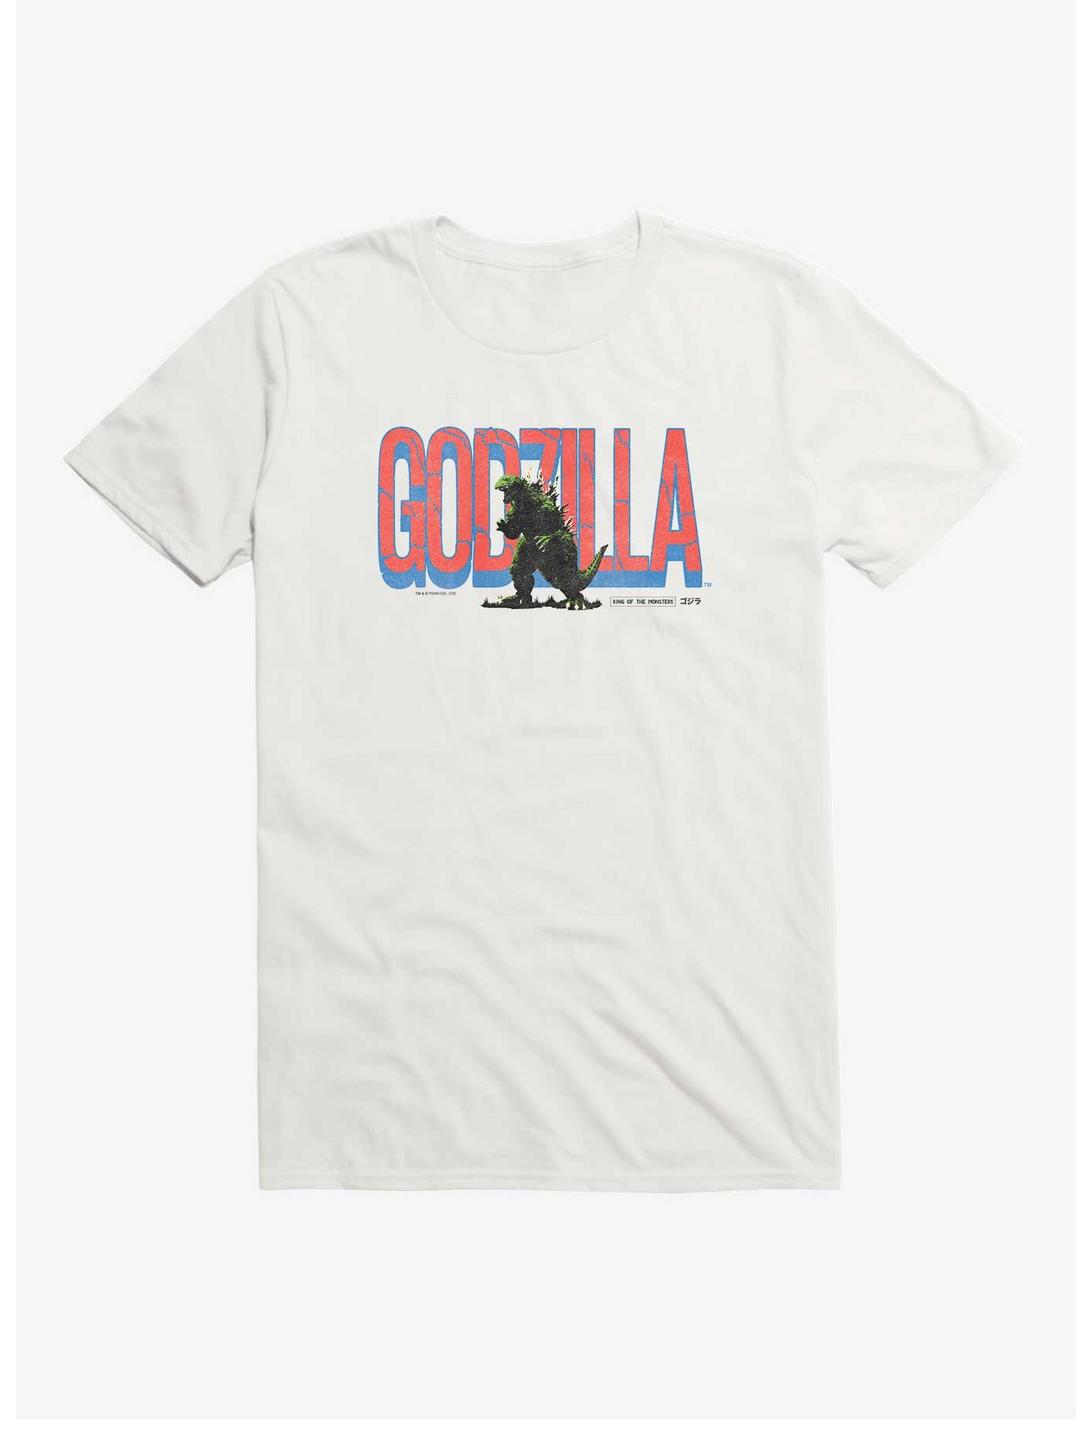 Godzilla King Of The Monsters T-Shirt, WHITE, hi-res